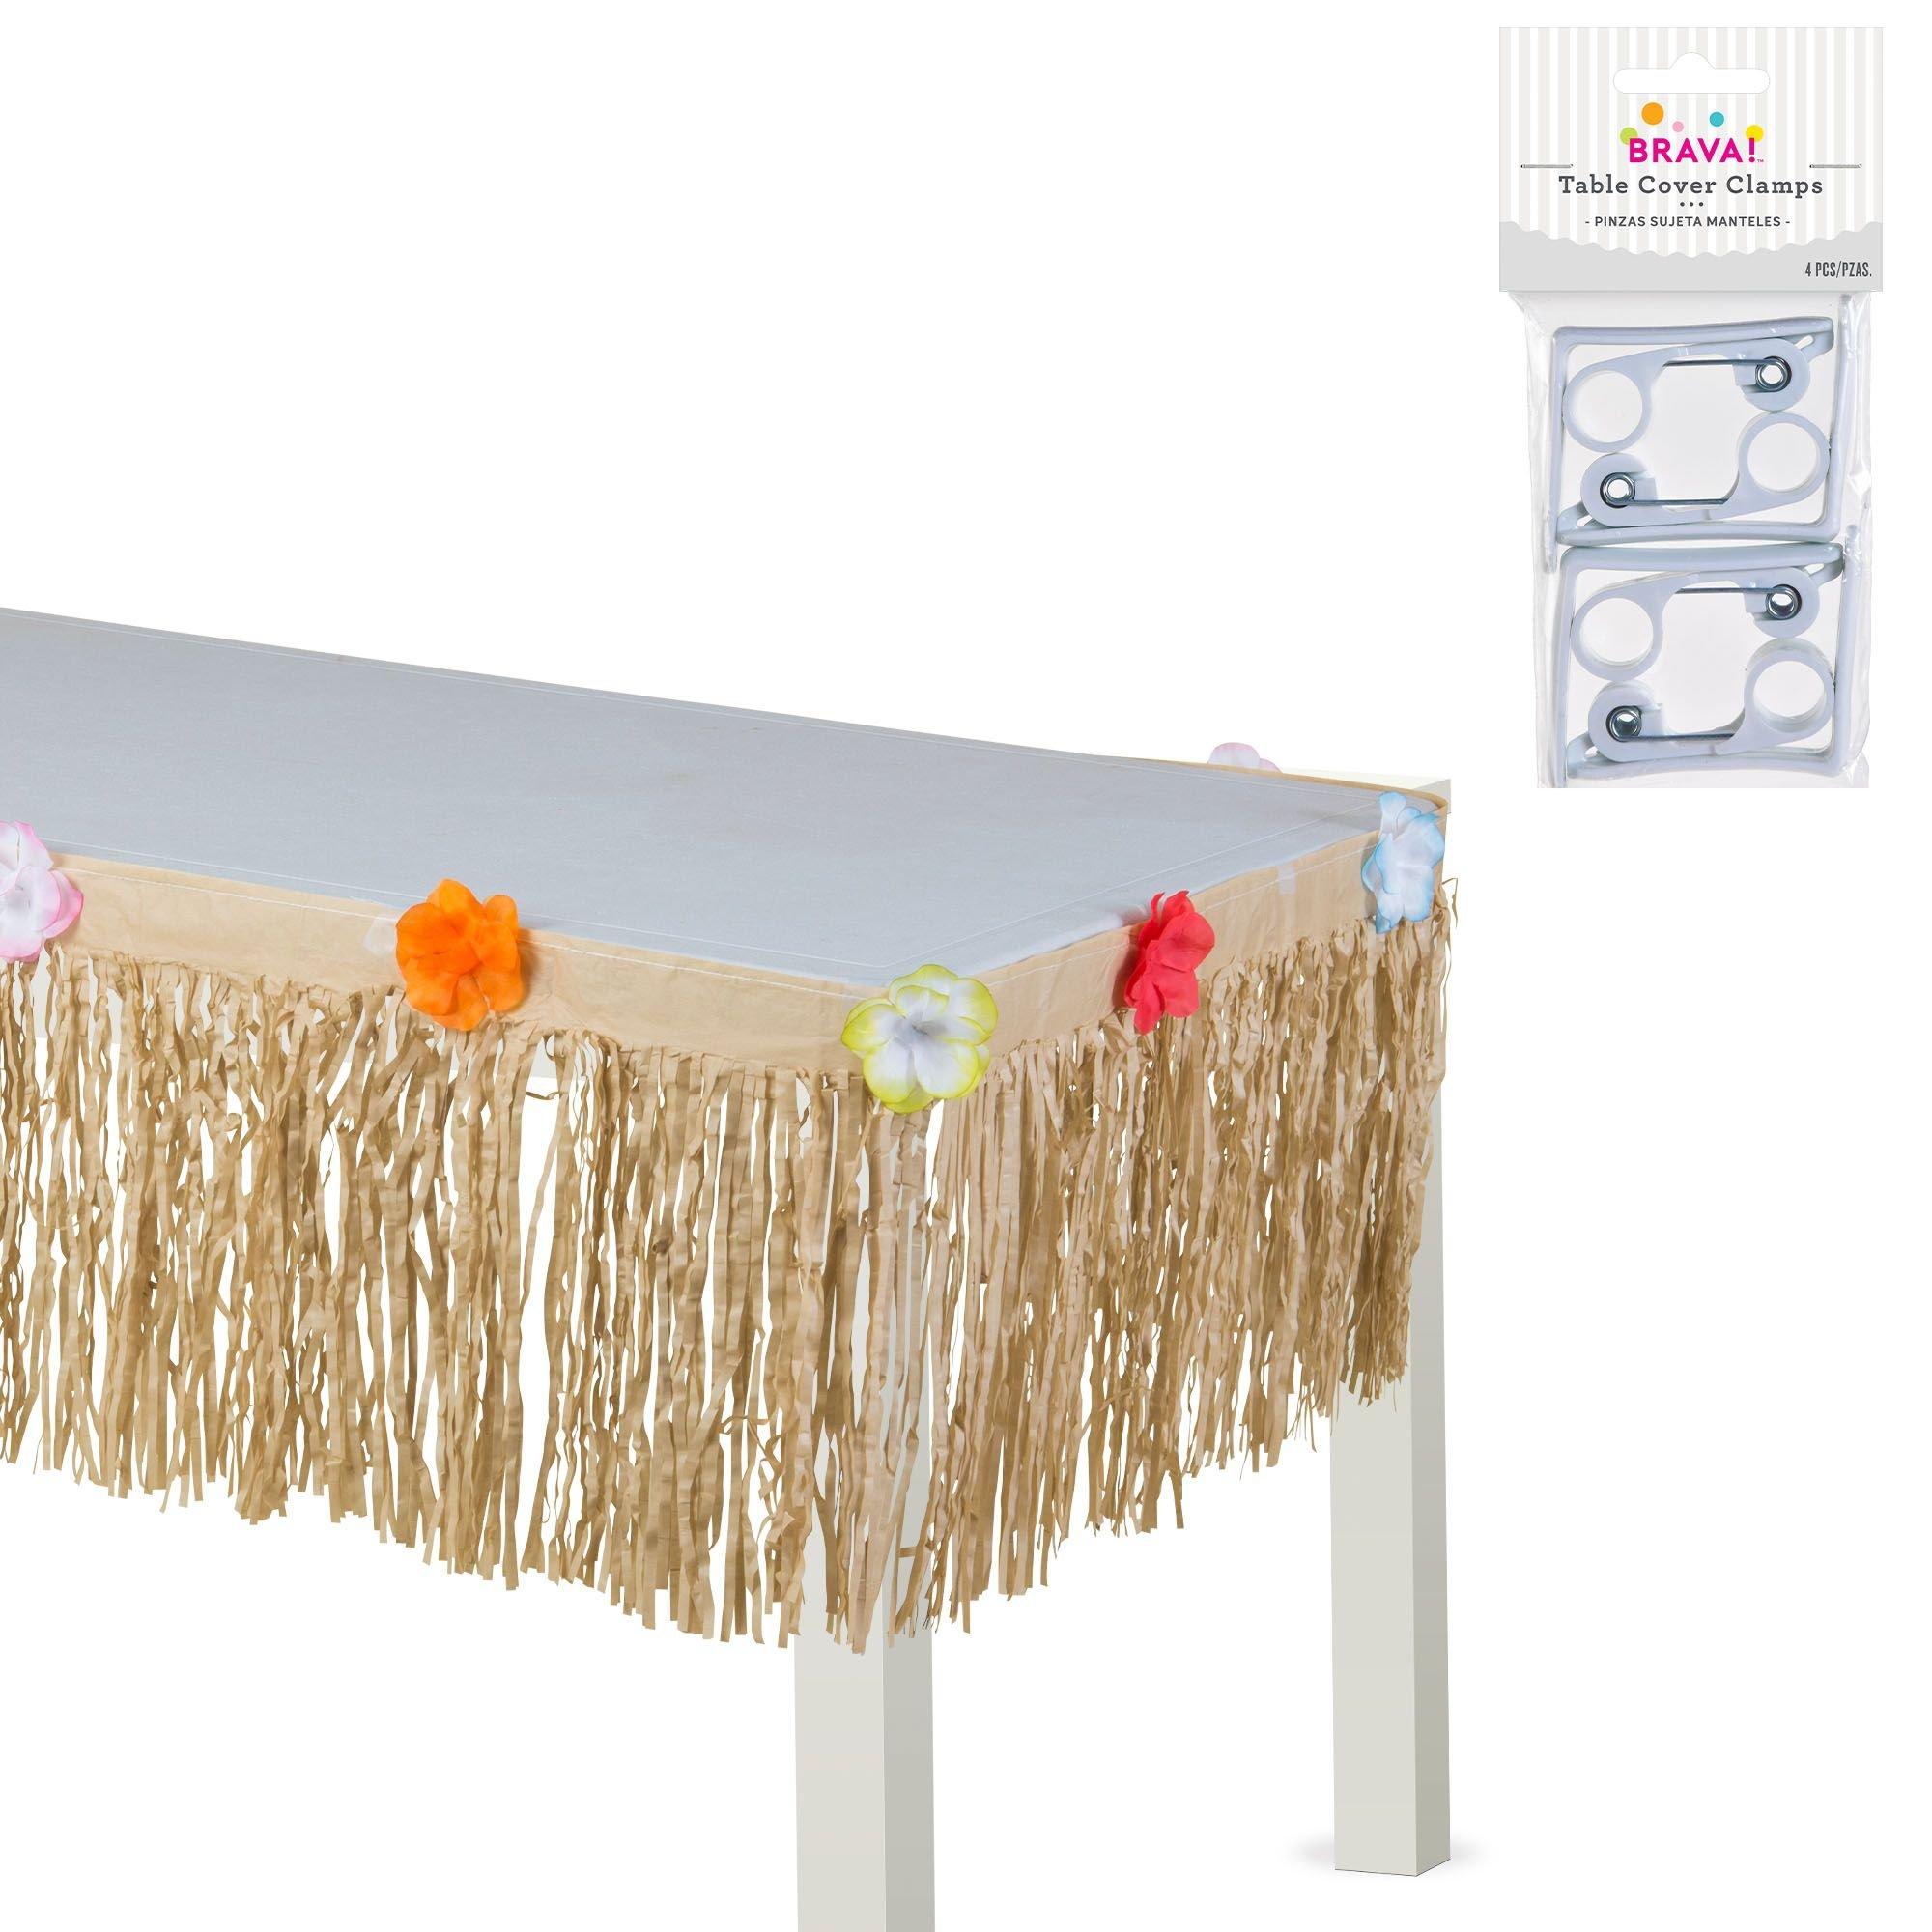 Tan Faux Grass Tissue Paper Fringe Table Skirt with Multicolor Fabric Flowers & Table Cover Clips, 9ft x 15in